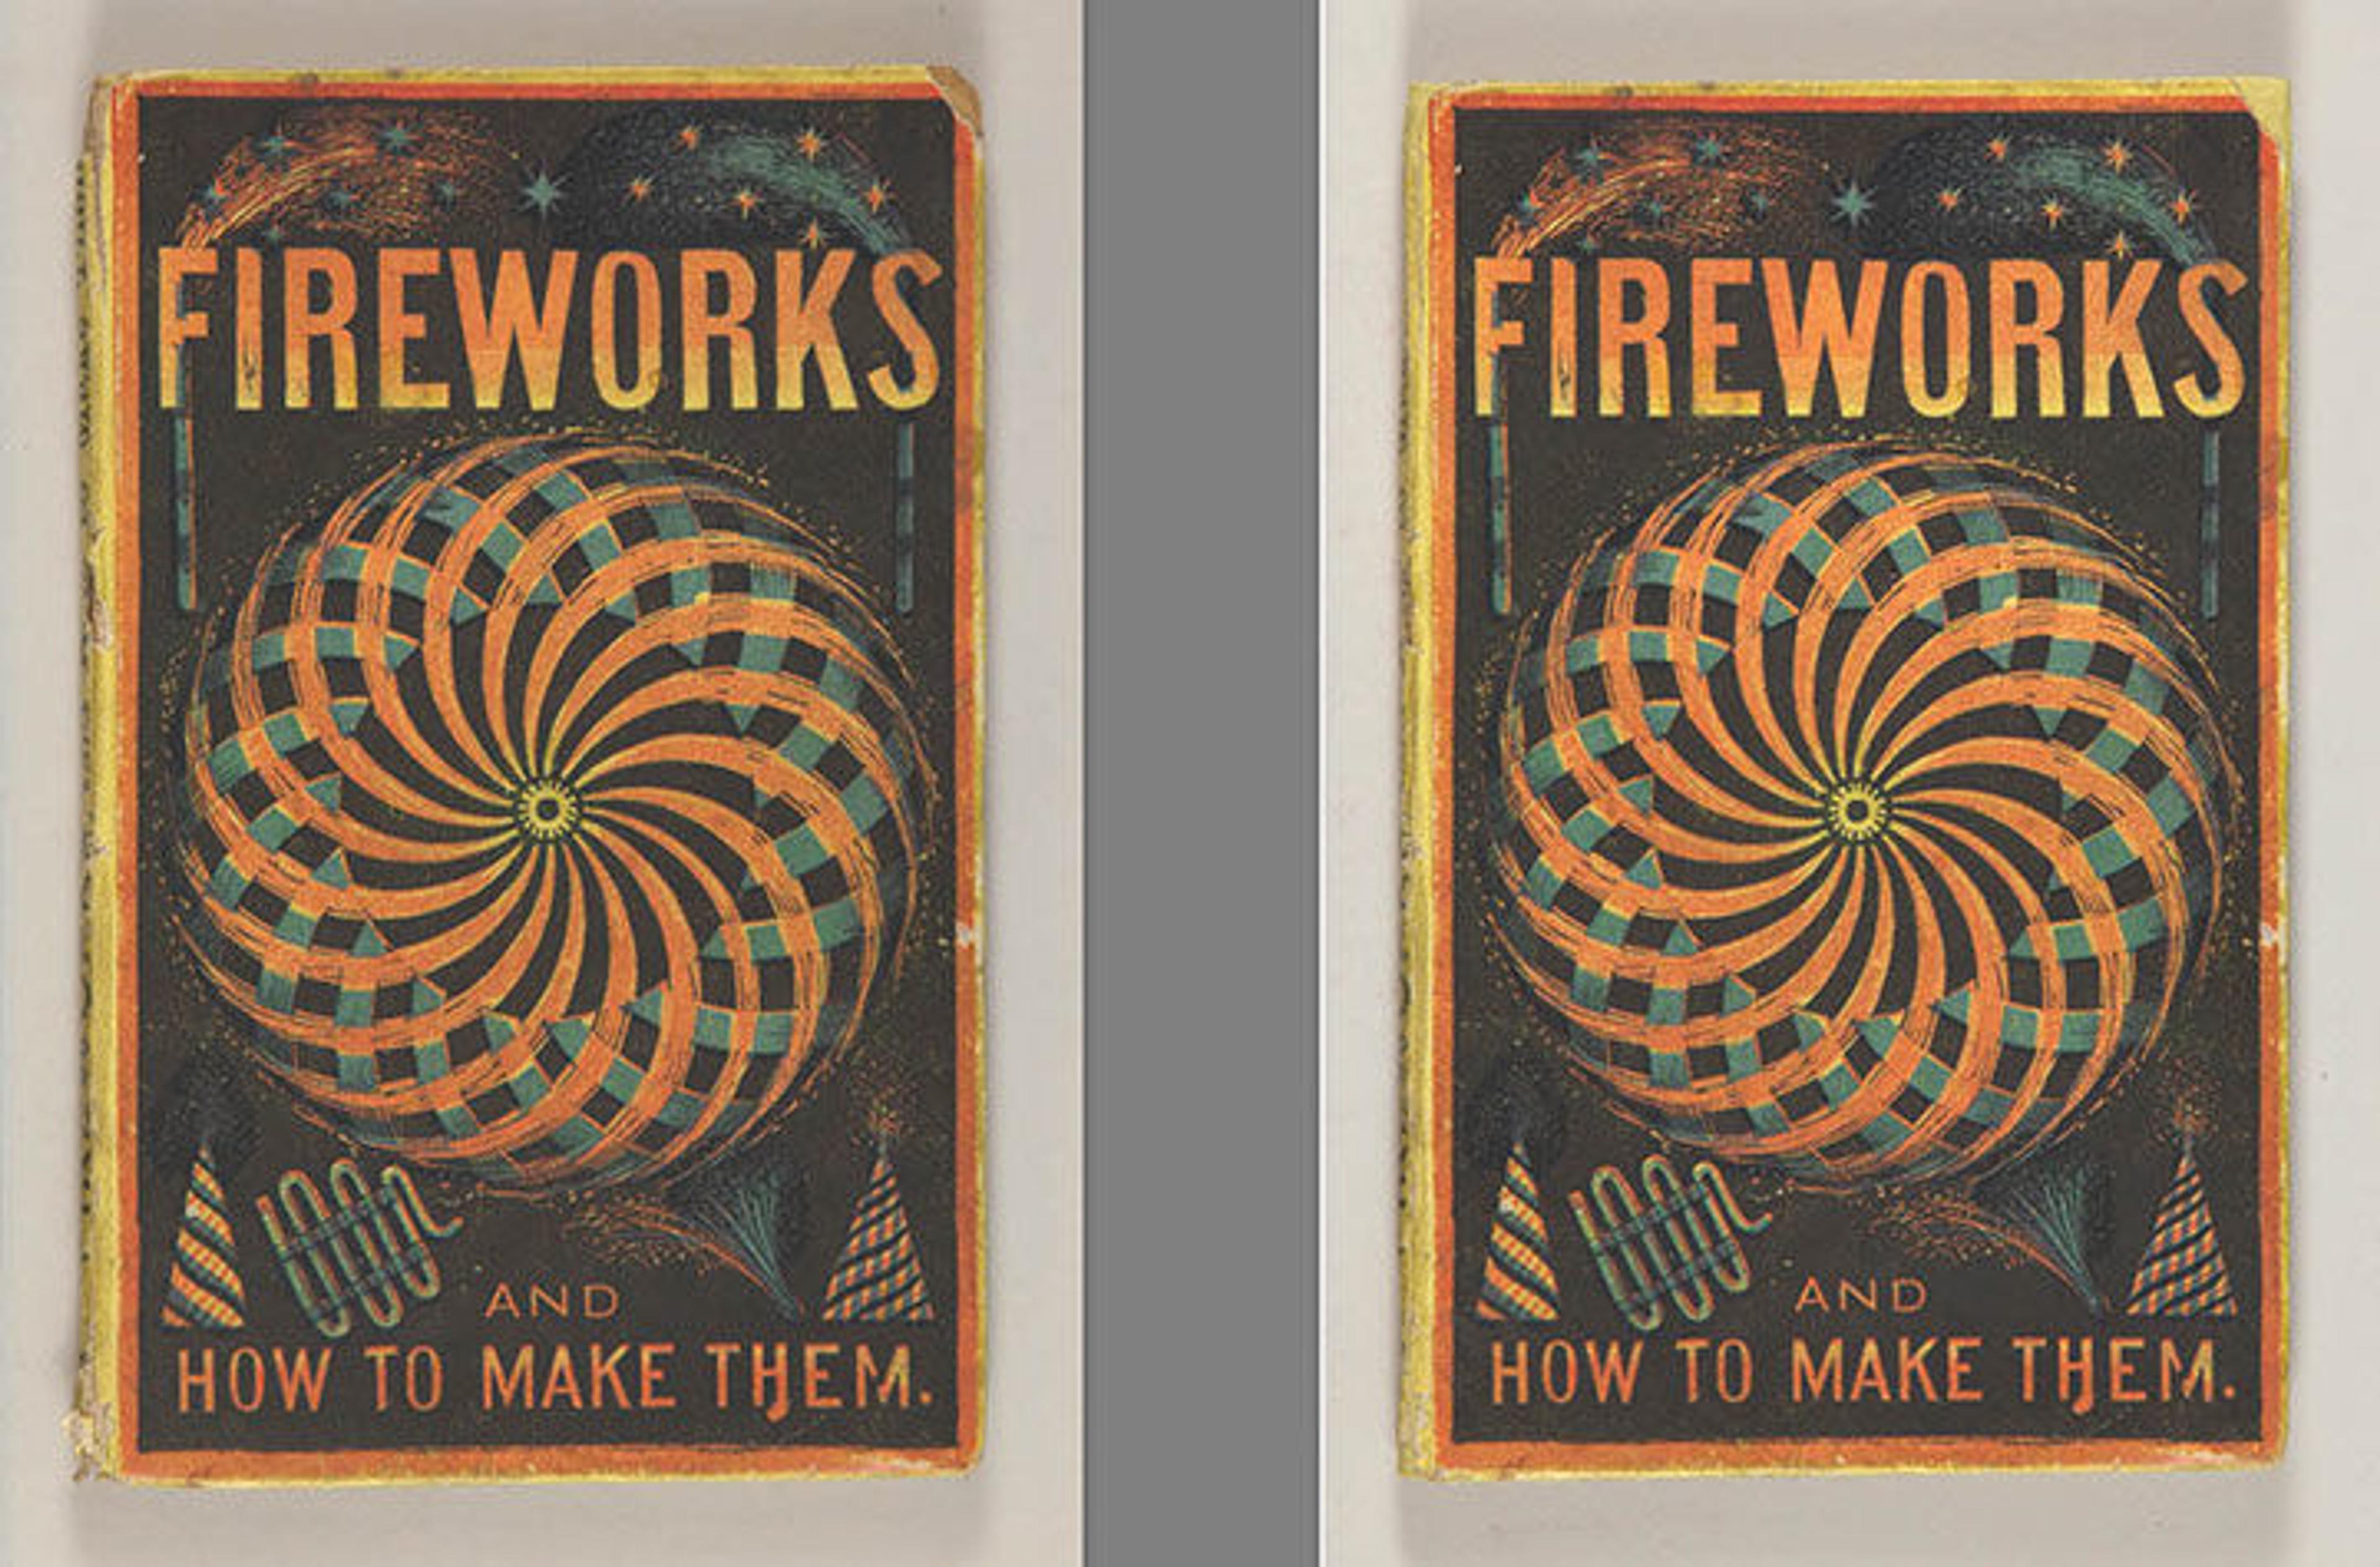 Fireworks covers